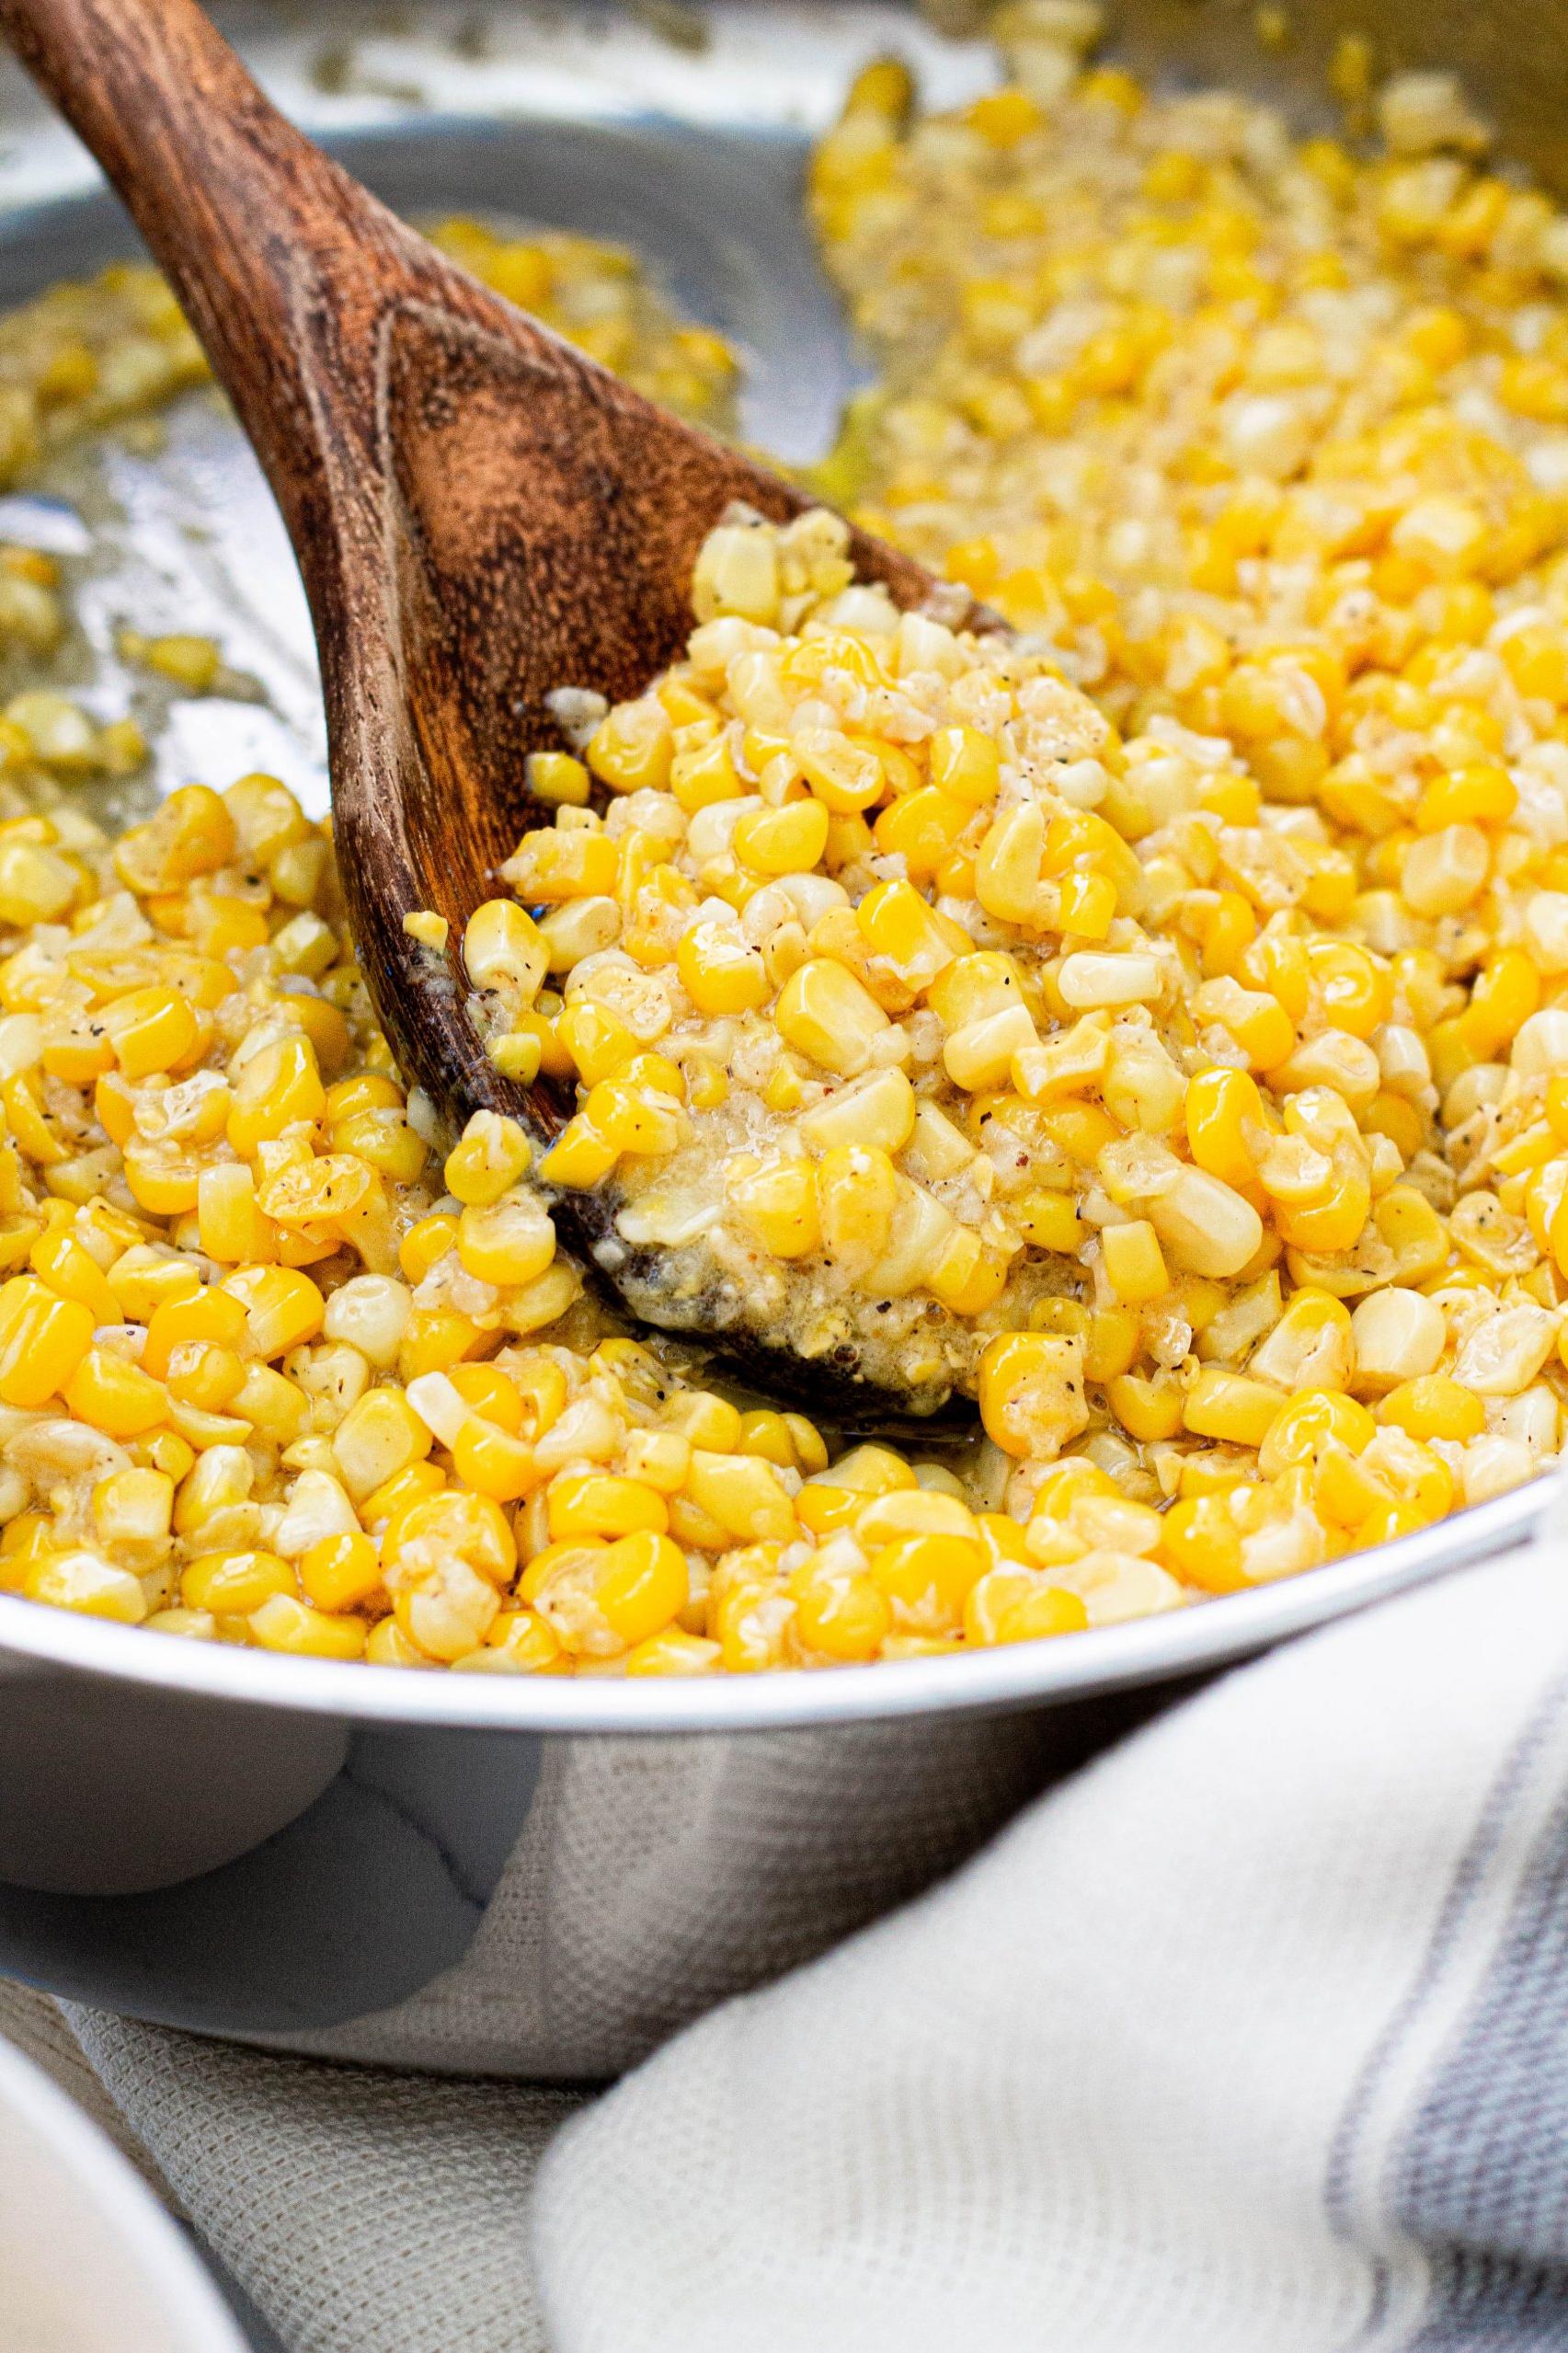  From the field to the pan - the fresher the corn the better the dish.